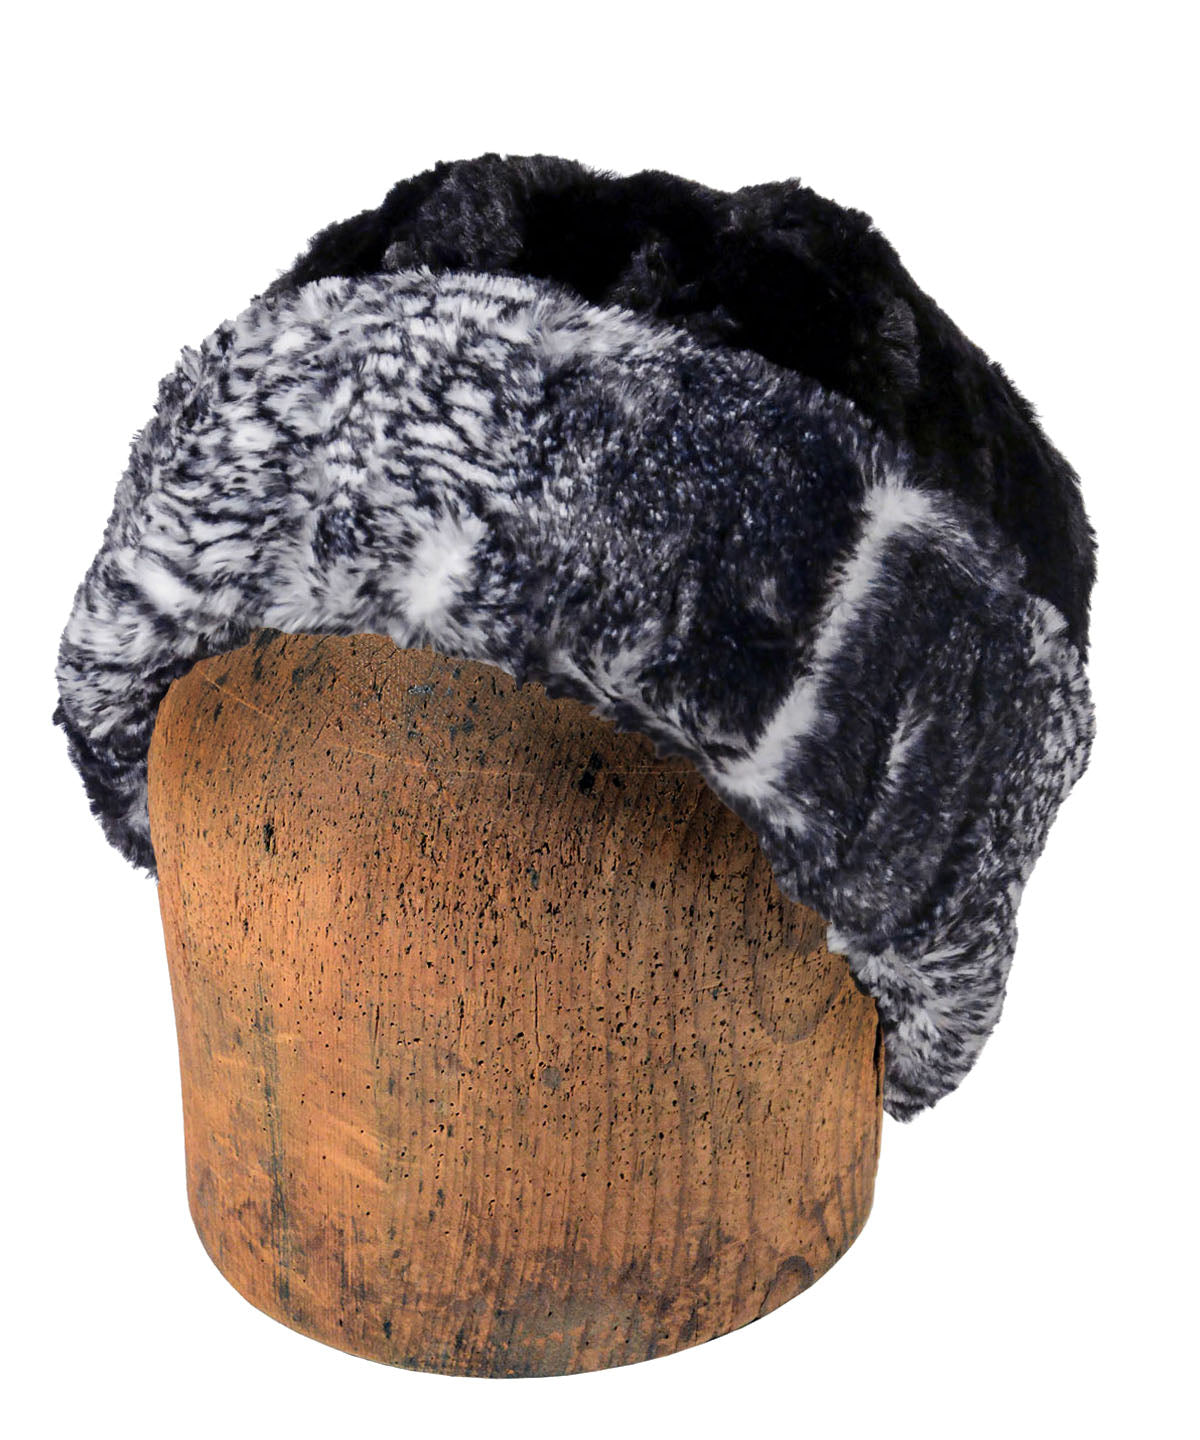 Men&#39;s Beanie Hat, Reversed | Black Mamba Faux Fur reversed to Cuddly Black Faux Fur | Handmade in the USA by Pandemonium Seattle